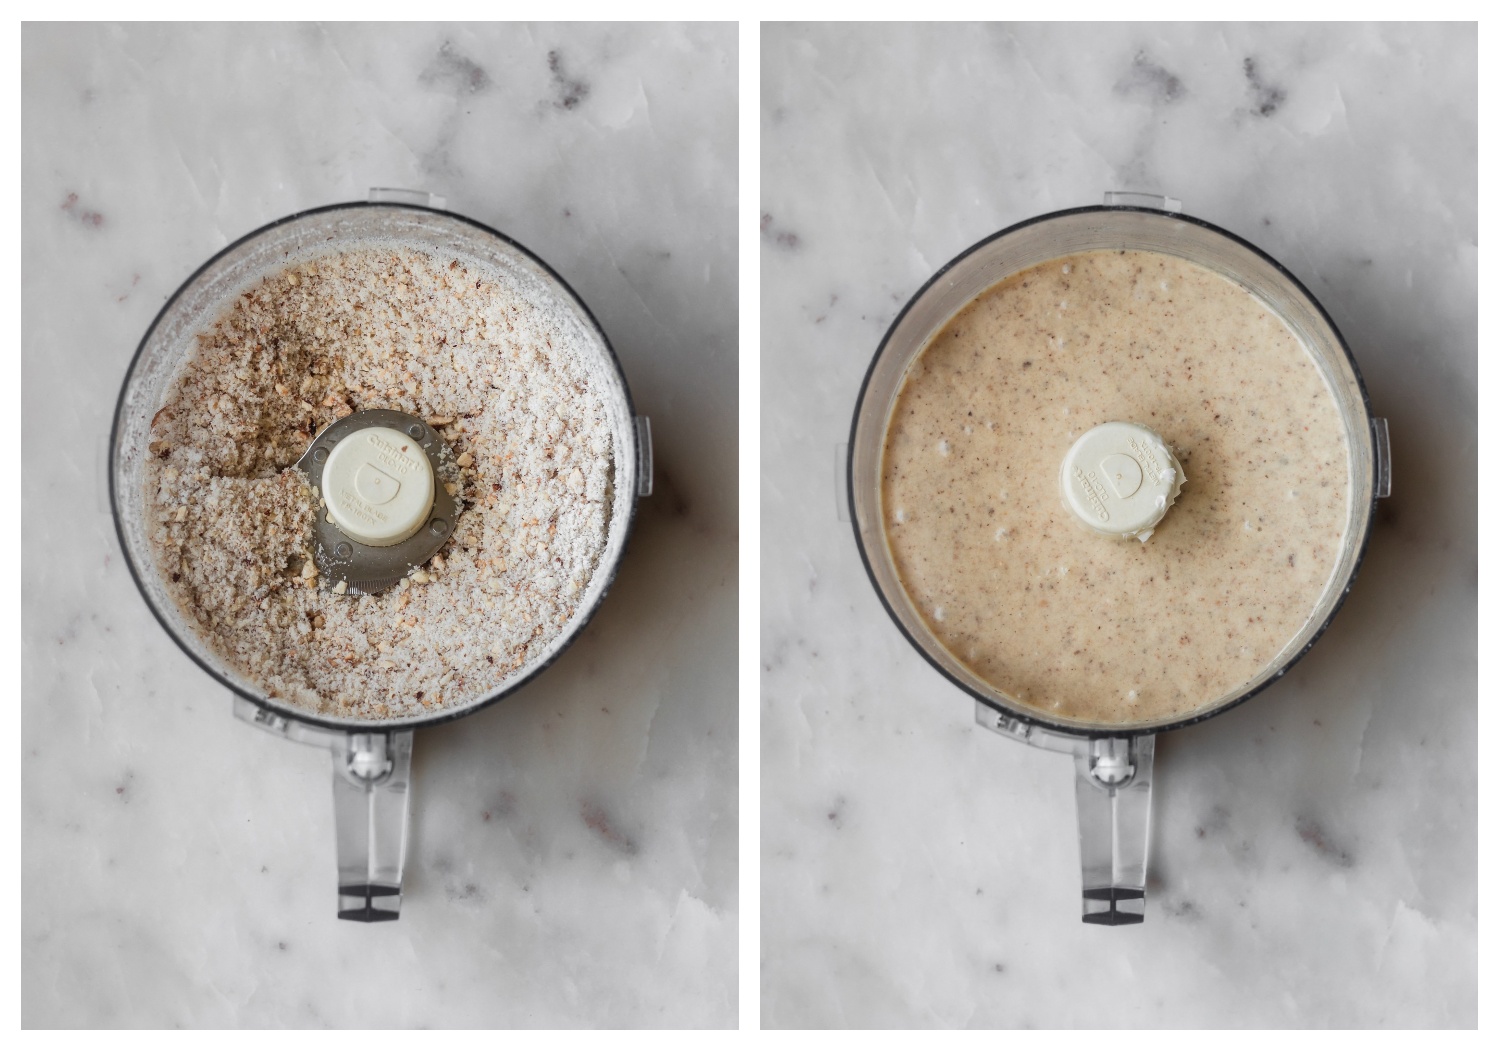 Two overhead shots of a food processor on a marble counter. On the left, the food processor has hazelnuts ground with sugar. On the right, we have hazelnut frangipane in the food processor.